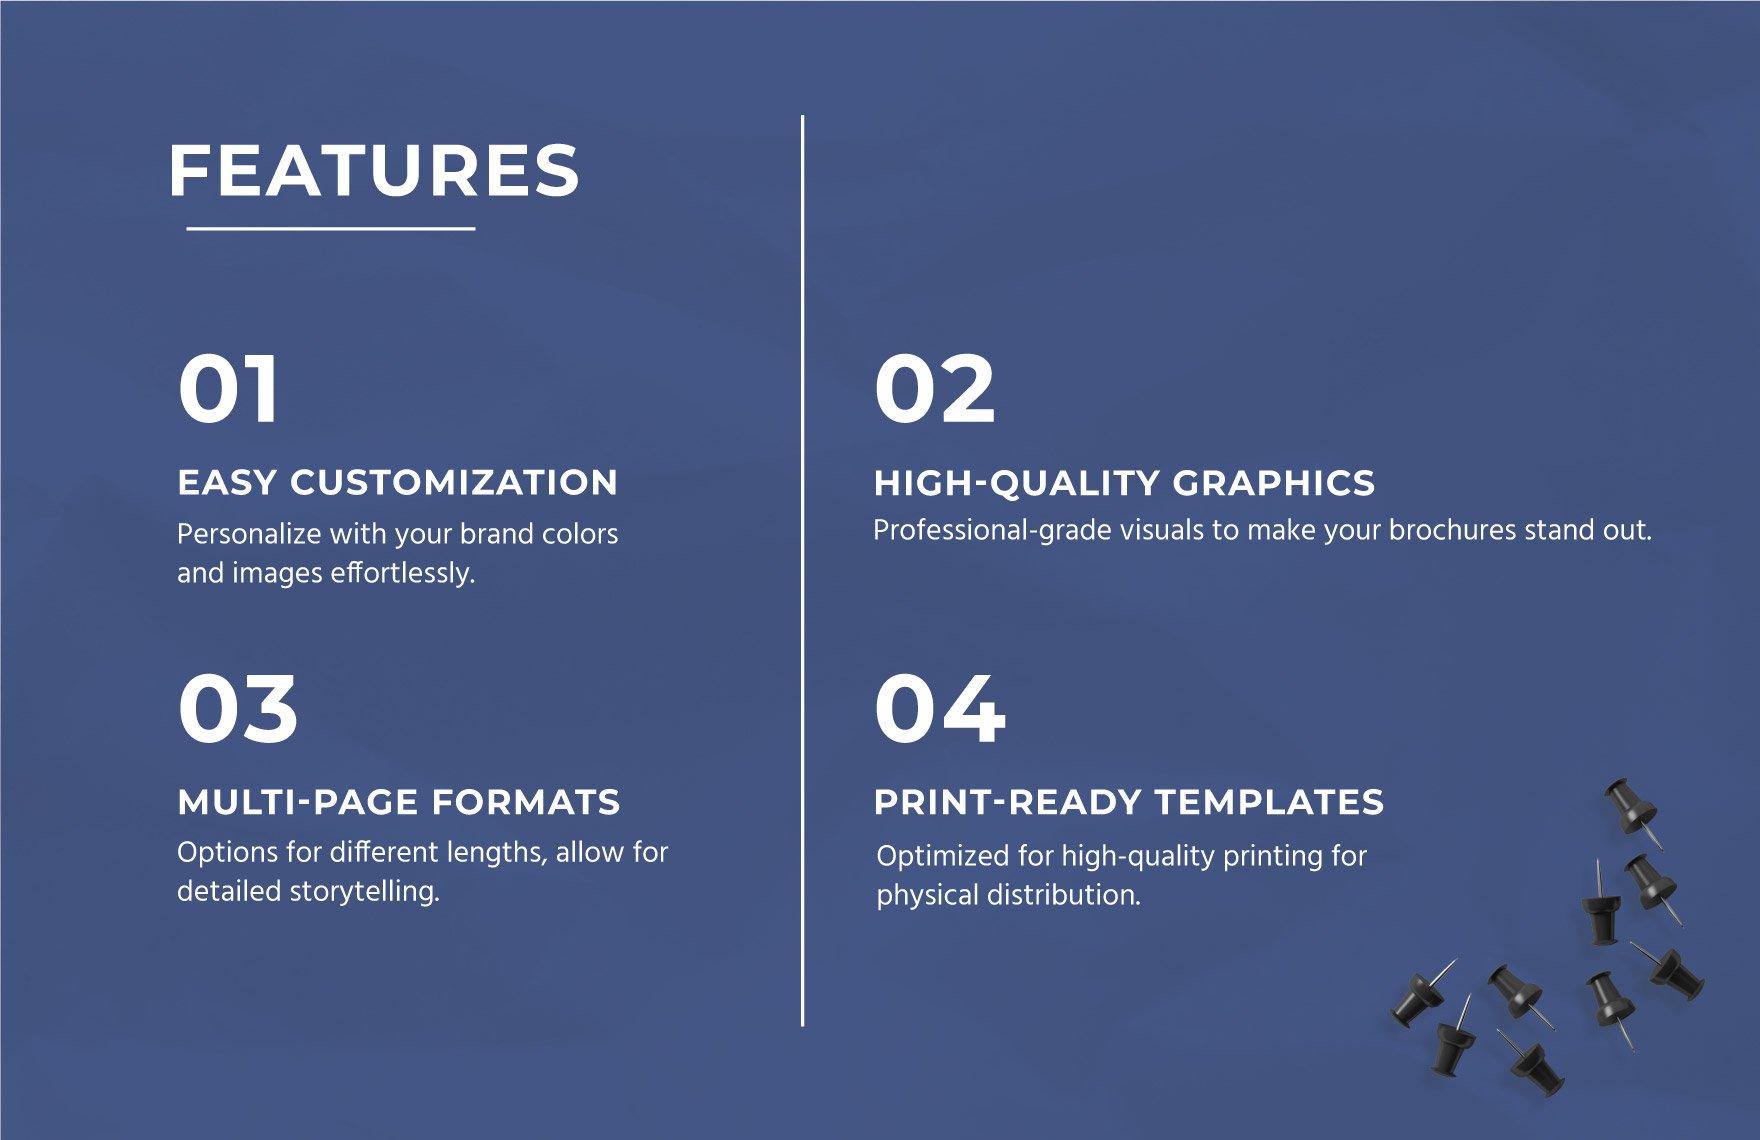 General Product Introduction Brochure Template